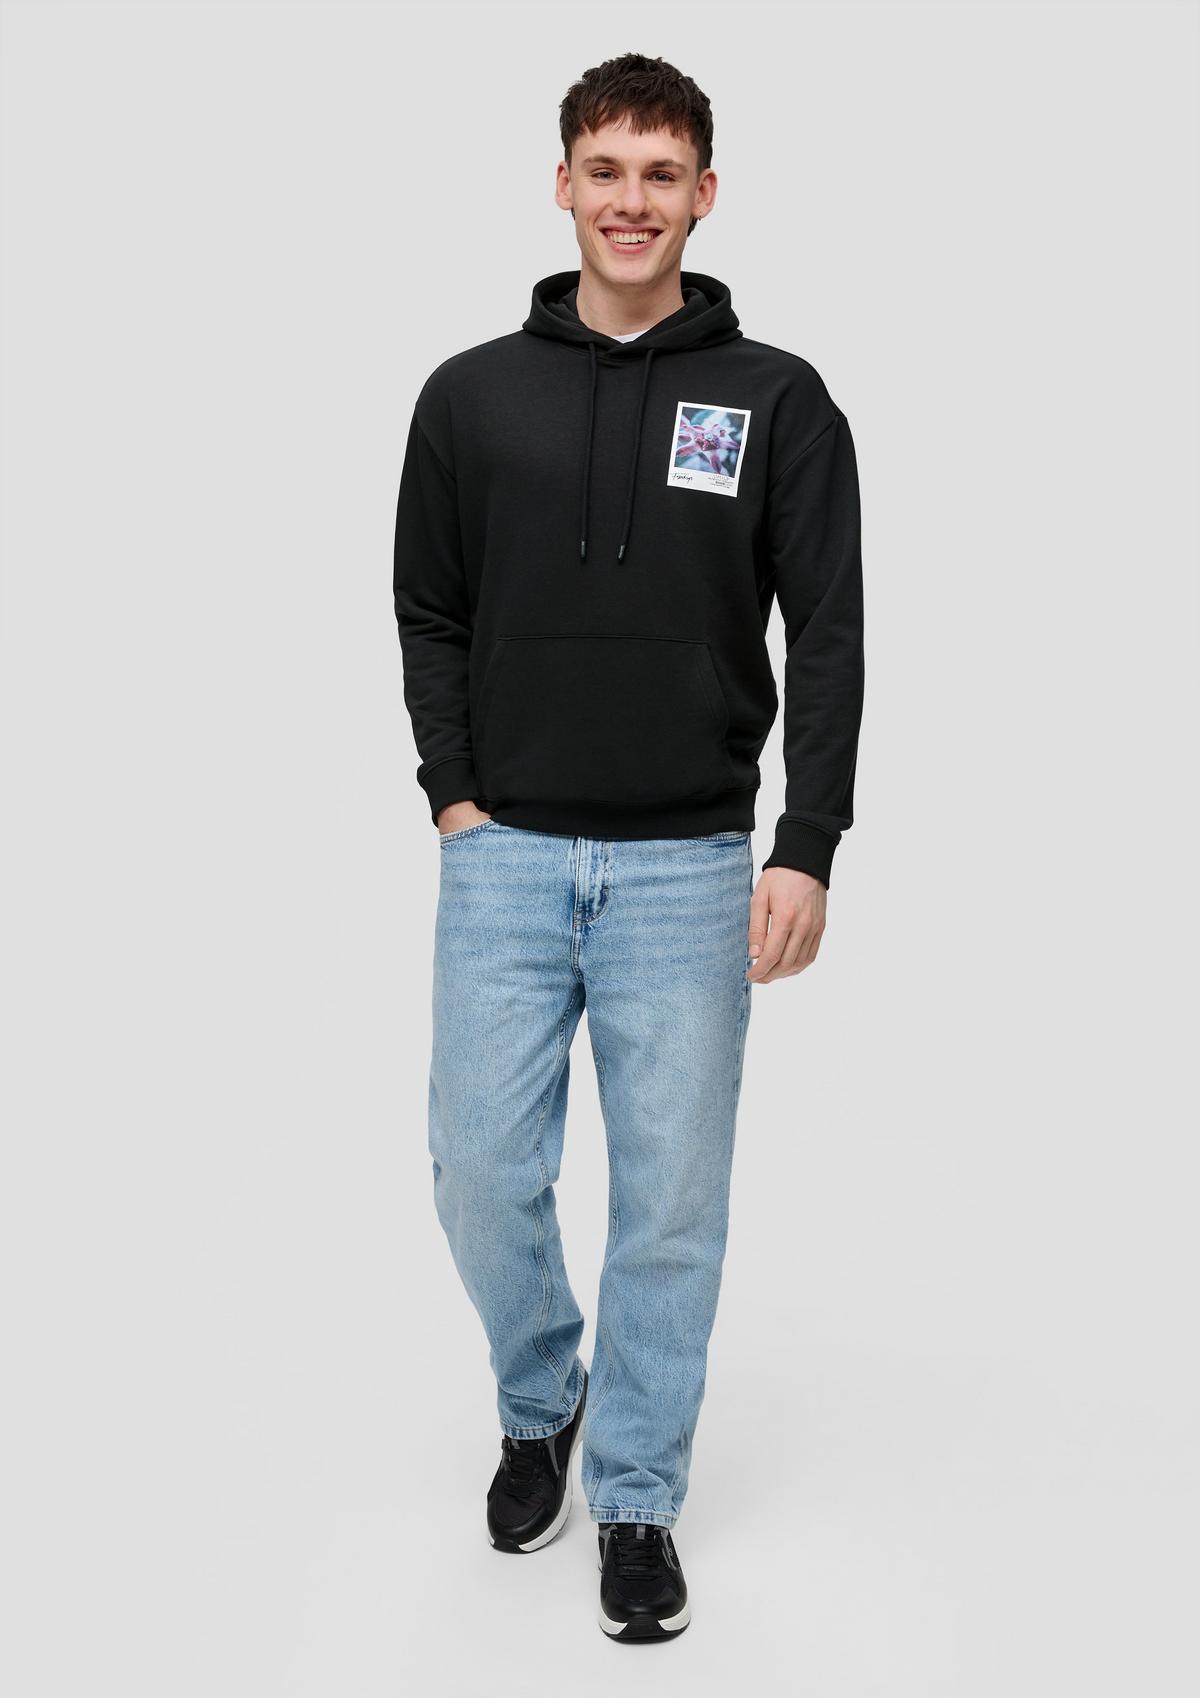 s.Oliver Hooded sweatshirt with photo print